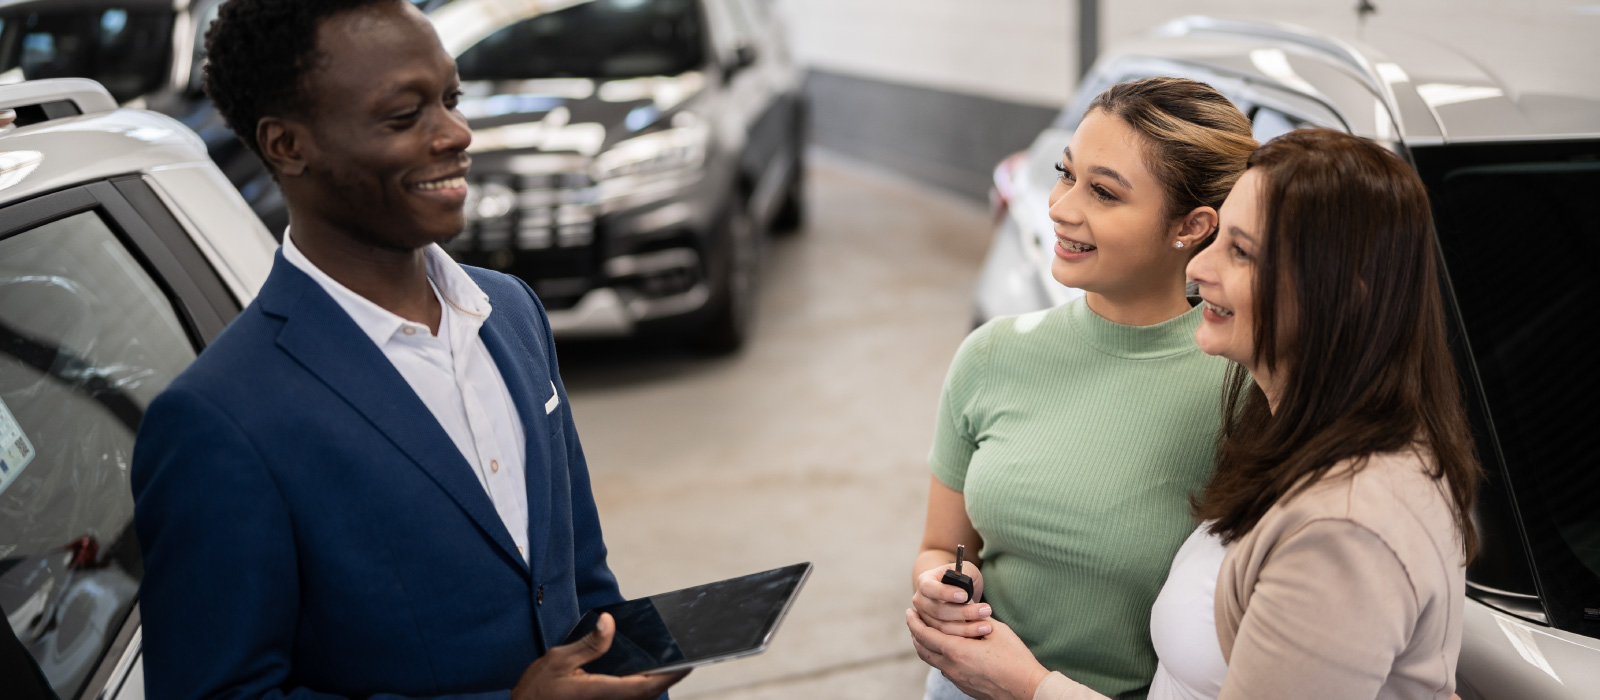 When Cosigner On A Car, Who Gets The Credit?